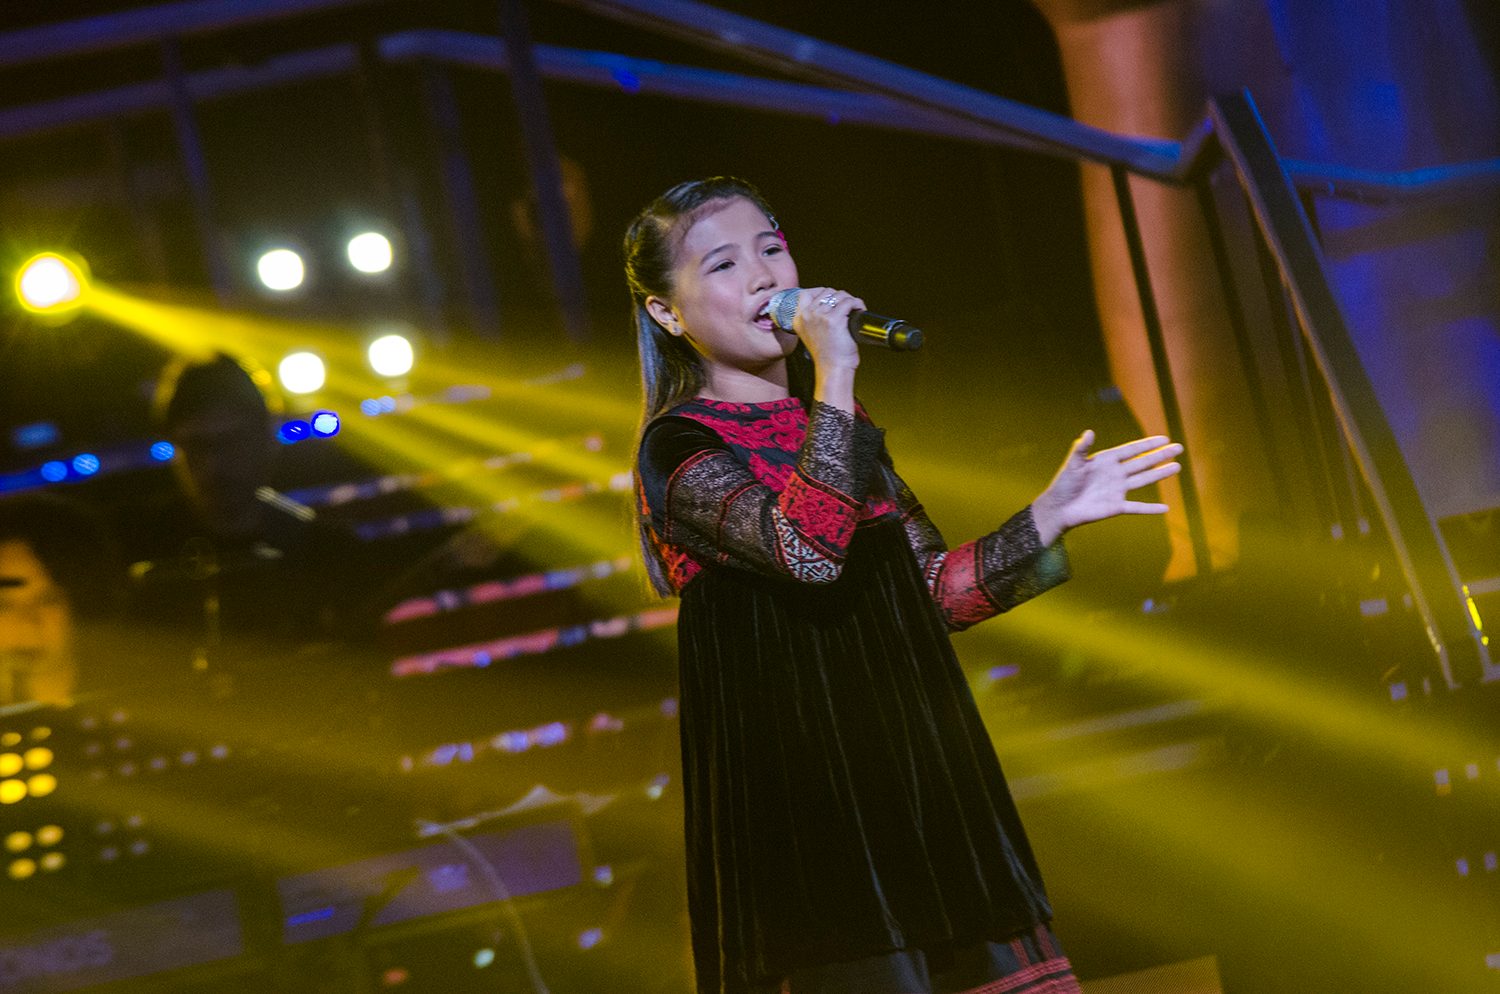 IN PHOTOS: Emotional 'Voice Kids PH' win for Team Lea